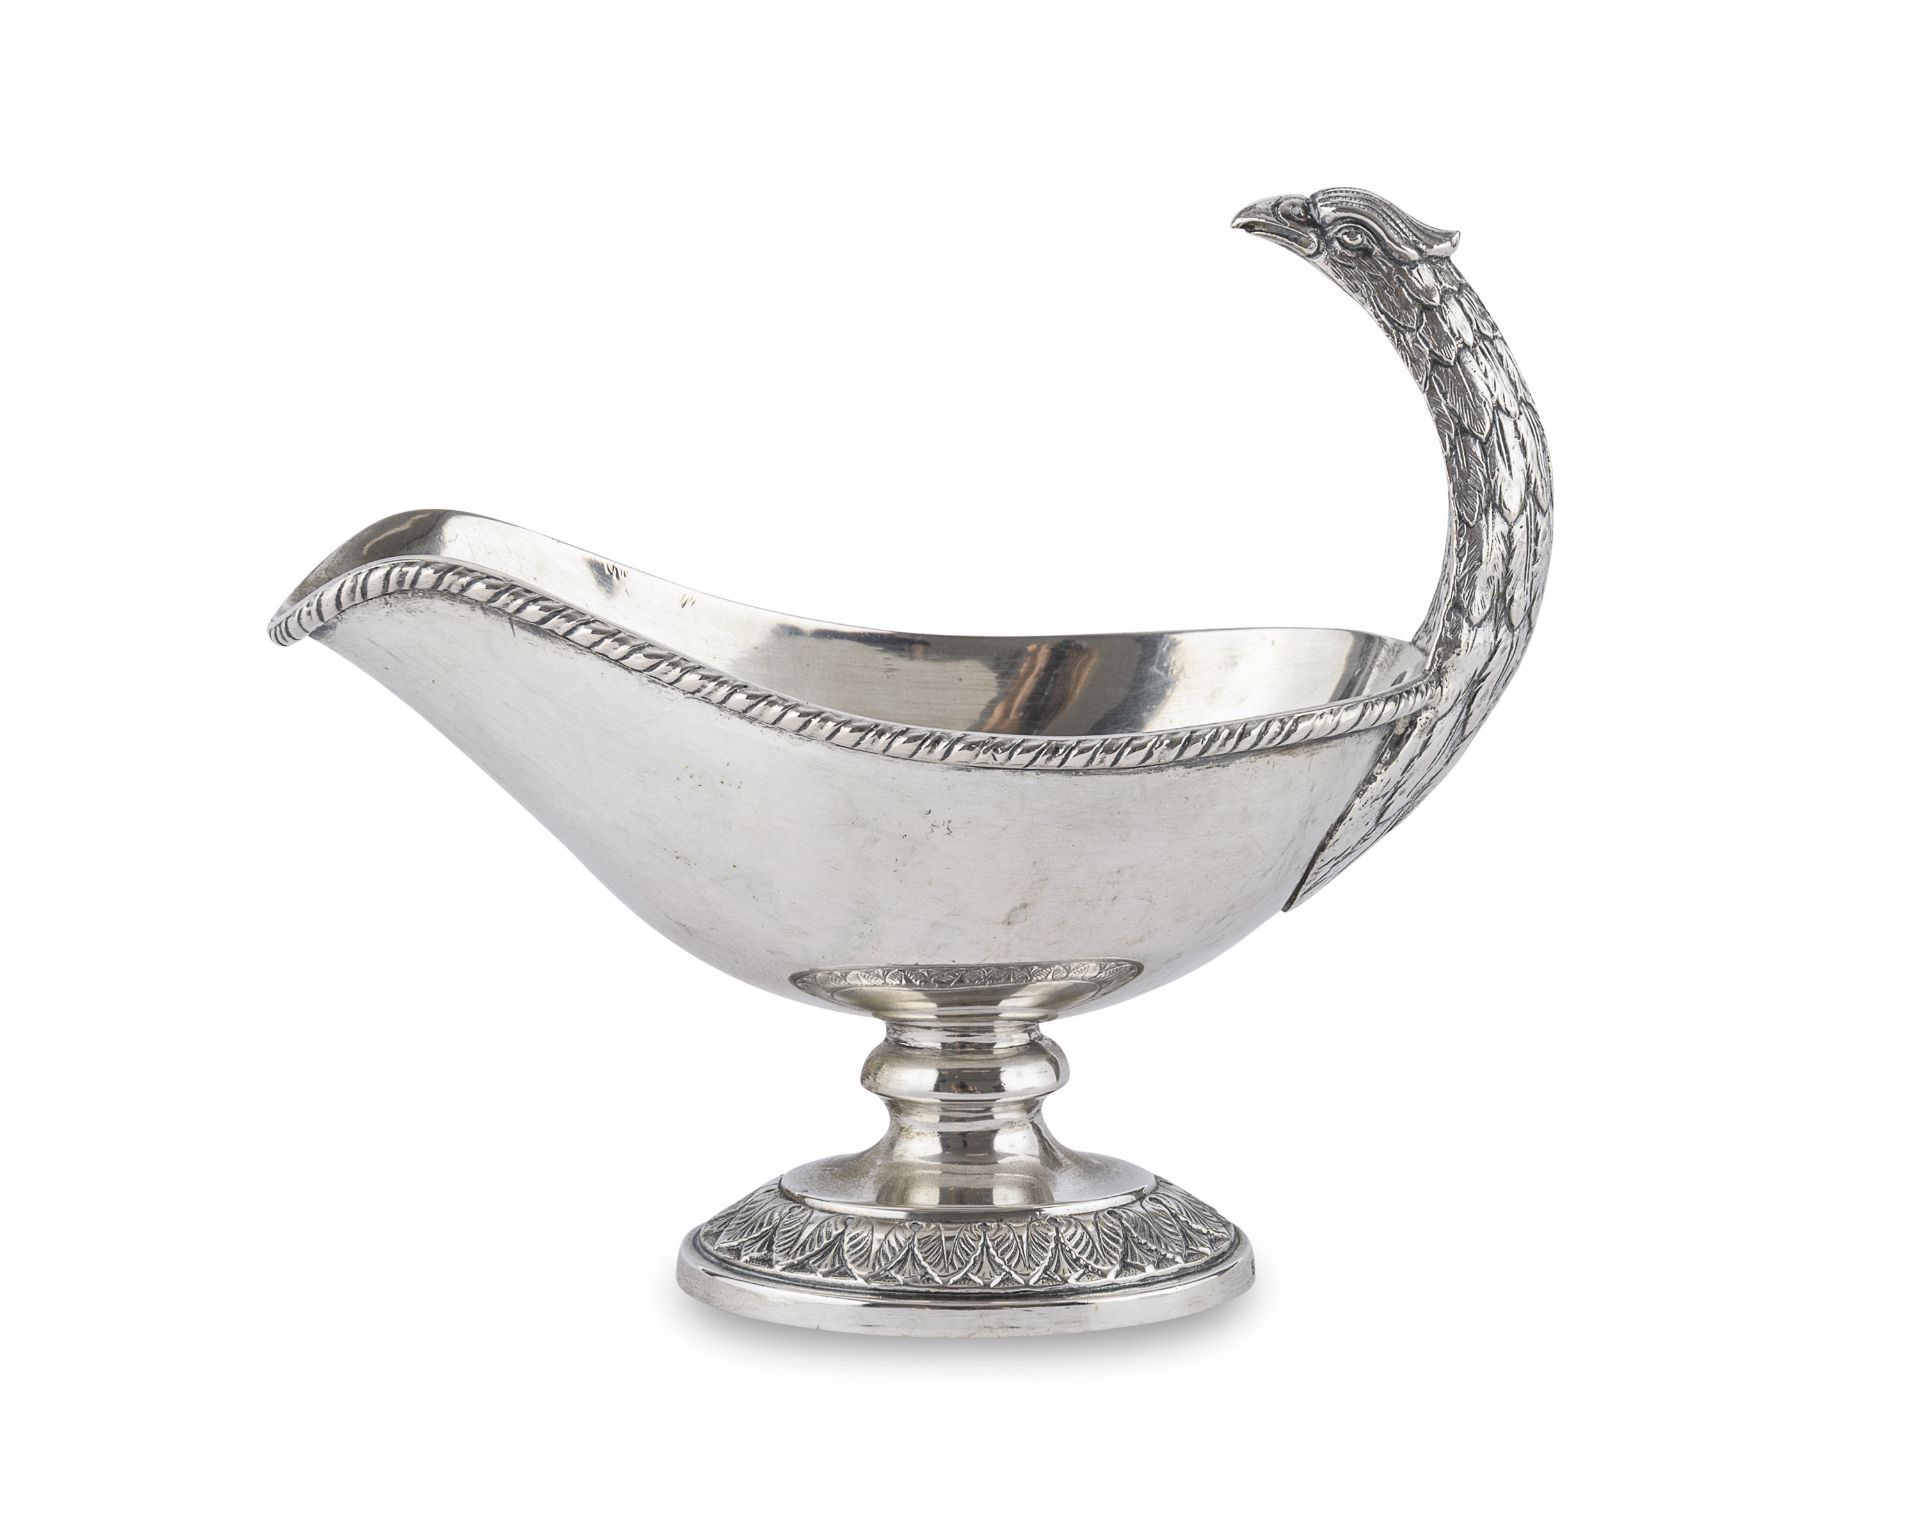 SILVER GRAVY BOAT FLORENCE PUNCH 1935/1945